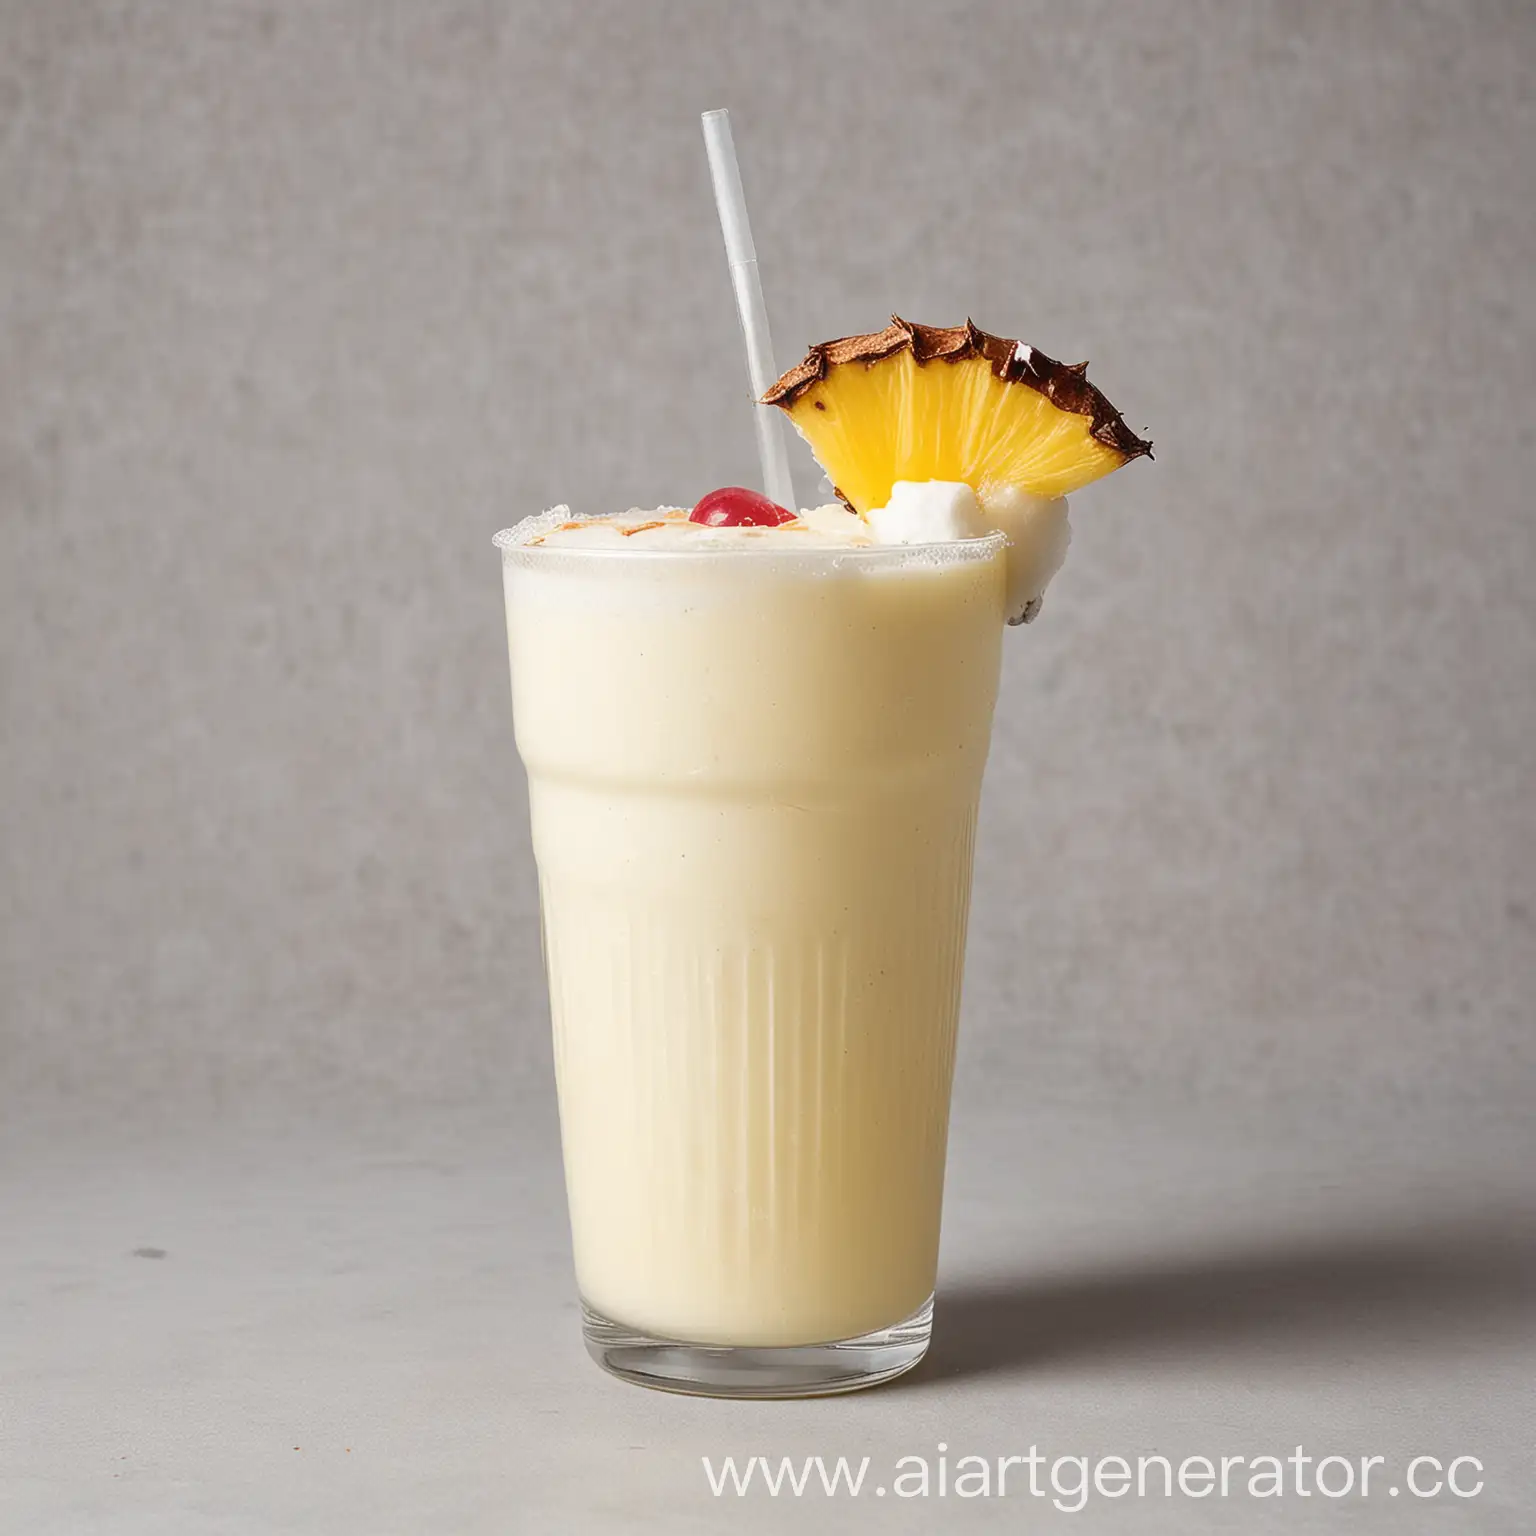 Refreshing-Pina-Colada-Cocktail-Served-in-a-Plastic-Cup-on-White-Background